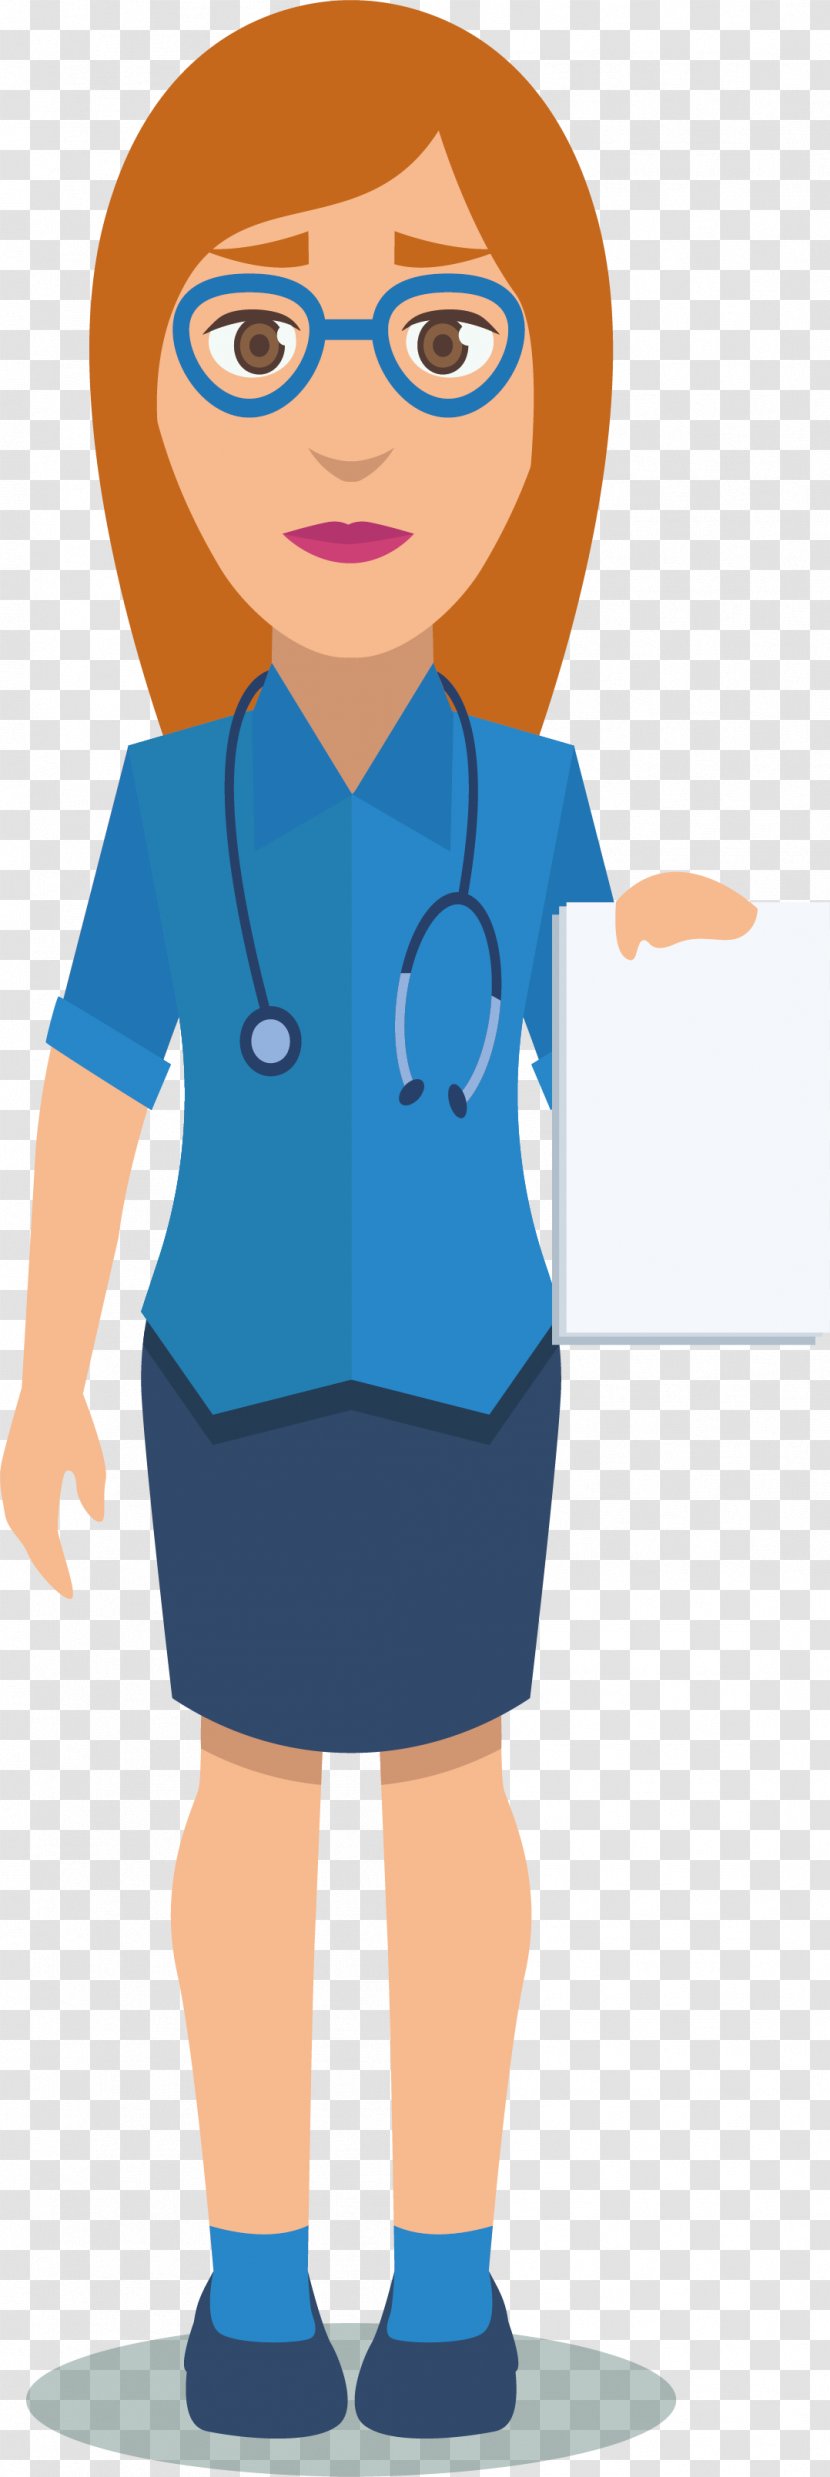 Physician Clip Art - Silhouette - Frowning Doctor Transparent PNG